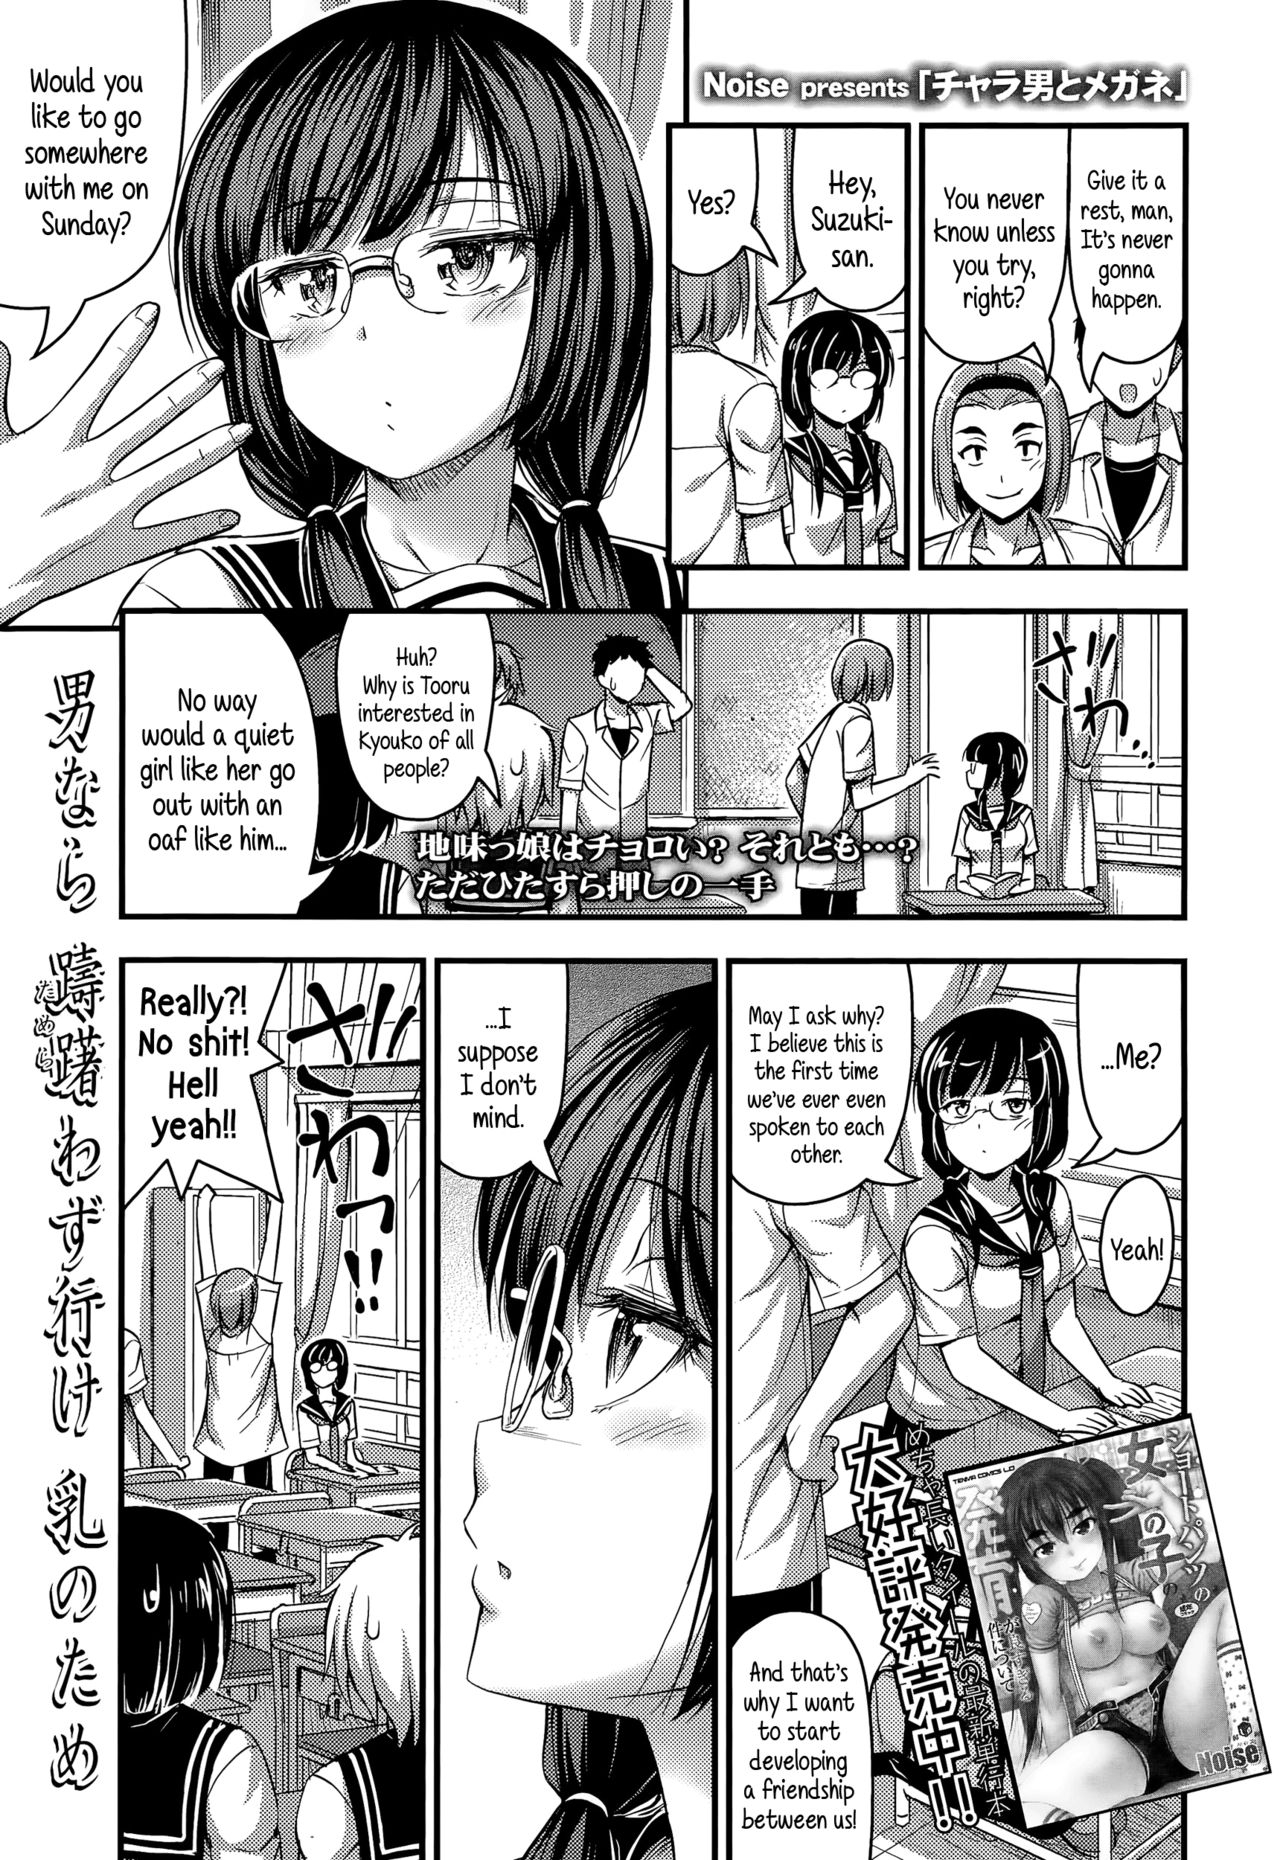 [Noise] Charao to Megane | Tomcat & Glasses (COMIC LO 2015-08) [English] {5 a.m.} 0